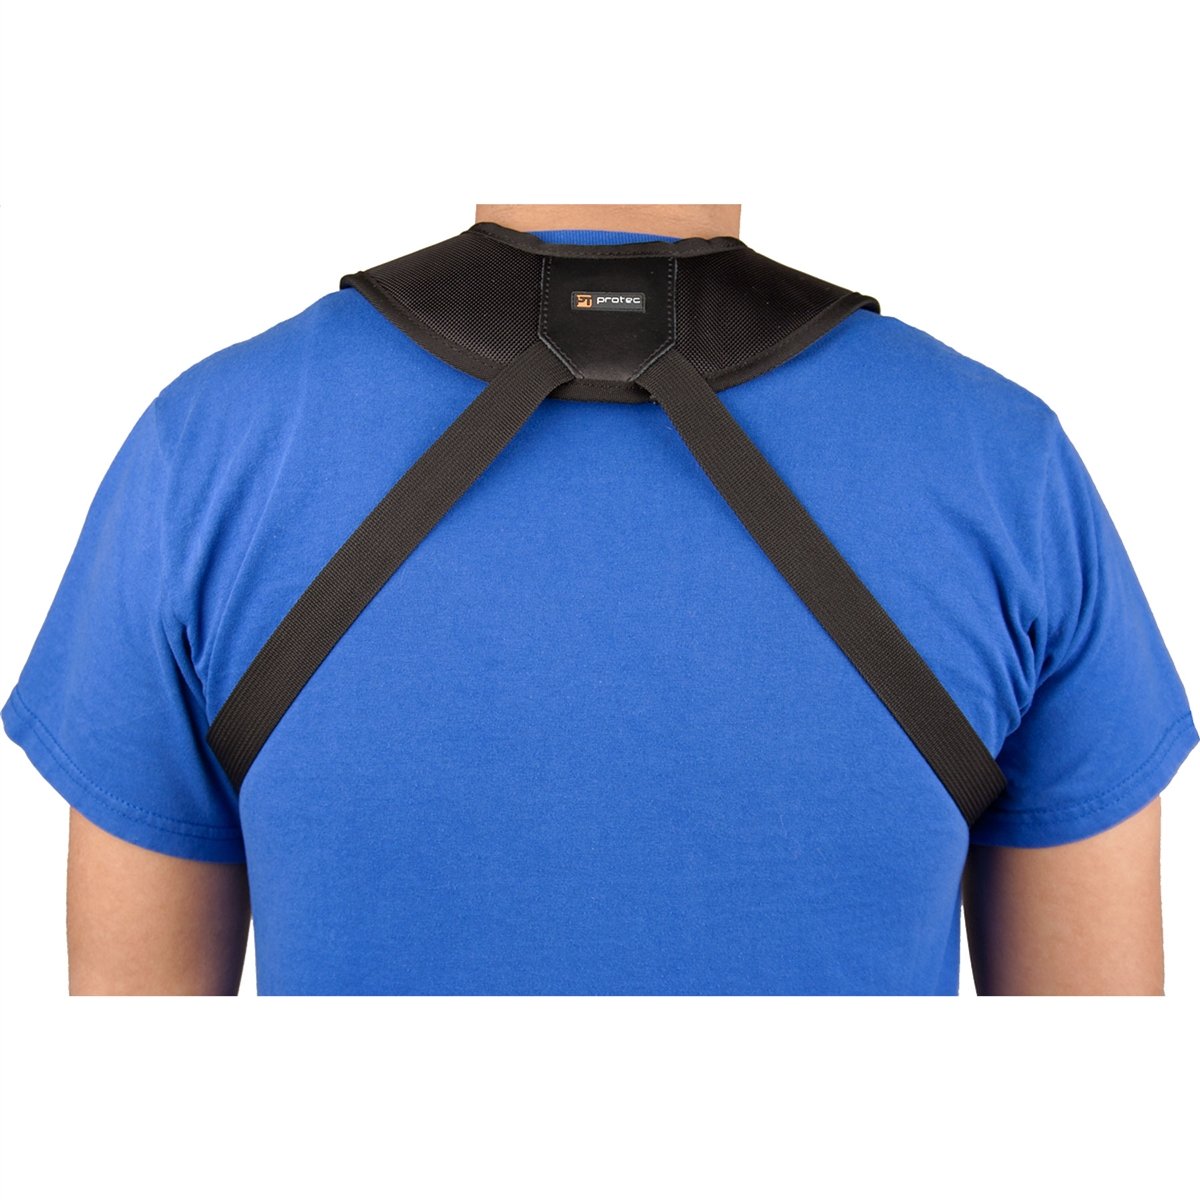 Protec - Deluxe Padded Harness for Bassoon-Accessories-Protec-Music Elements